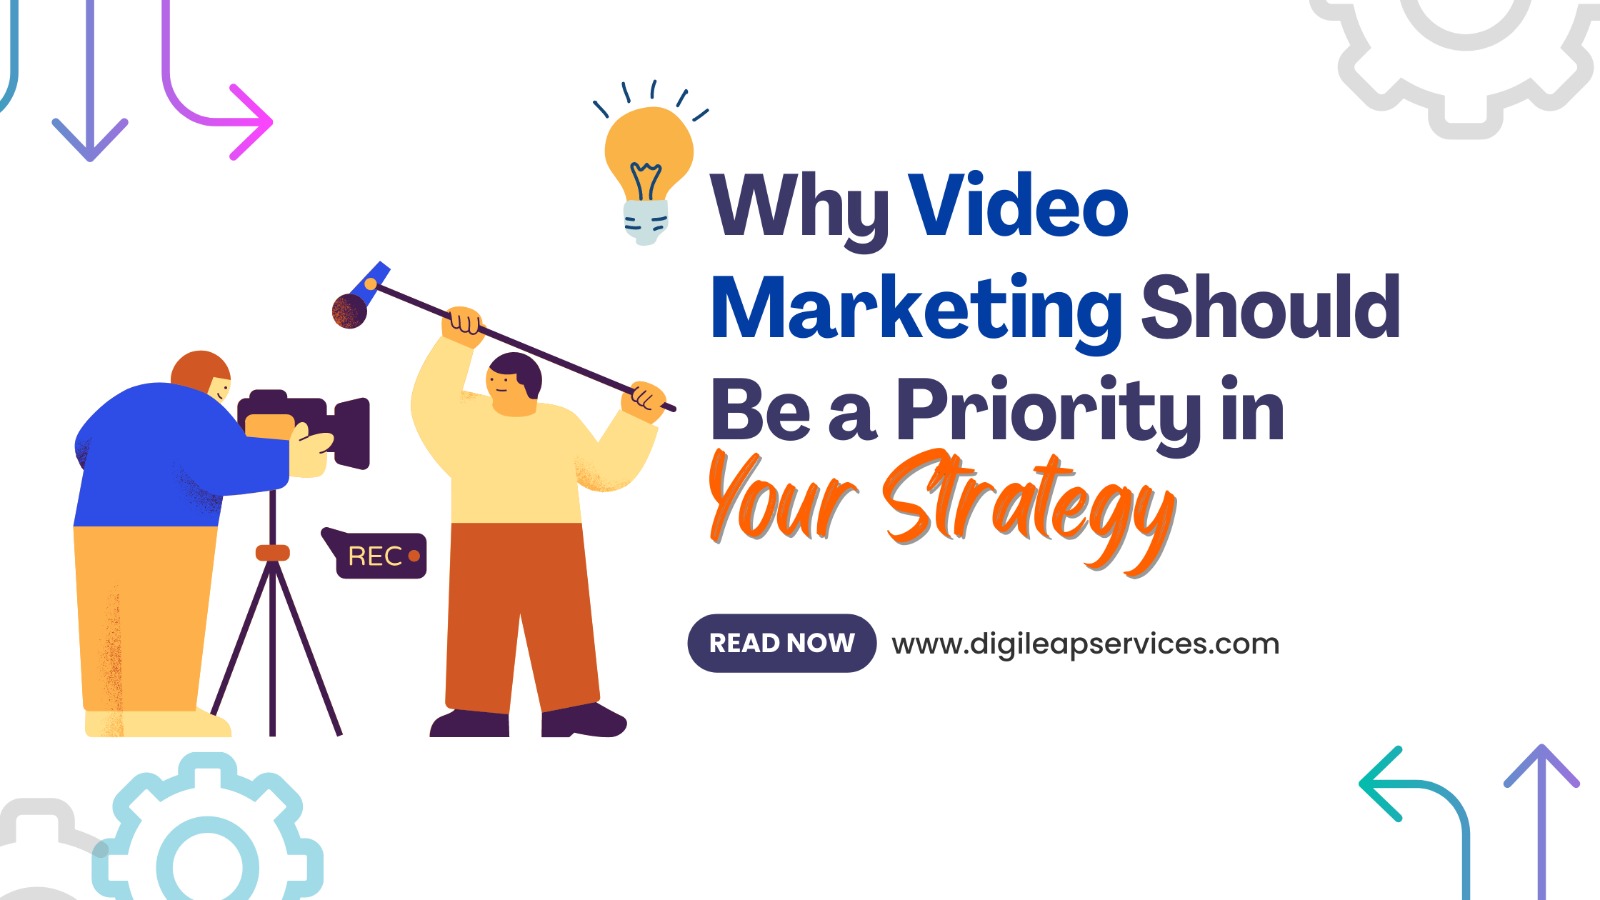 Why Video Marketing Should Be a Priority in Your Strategy